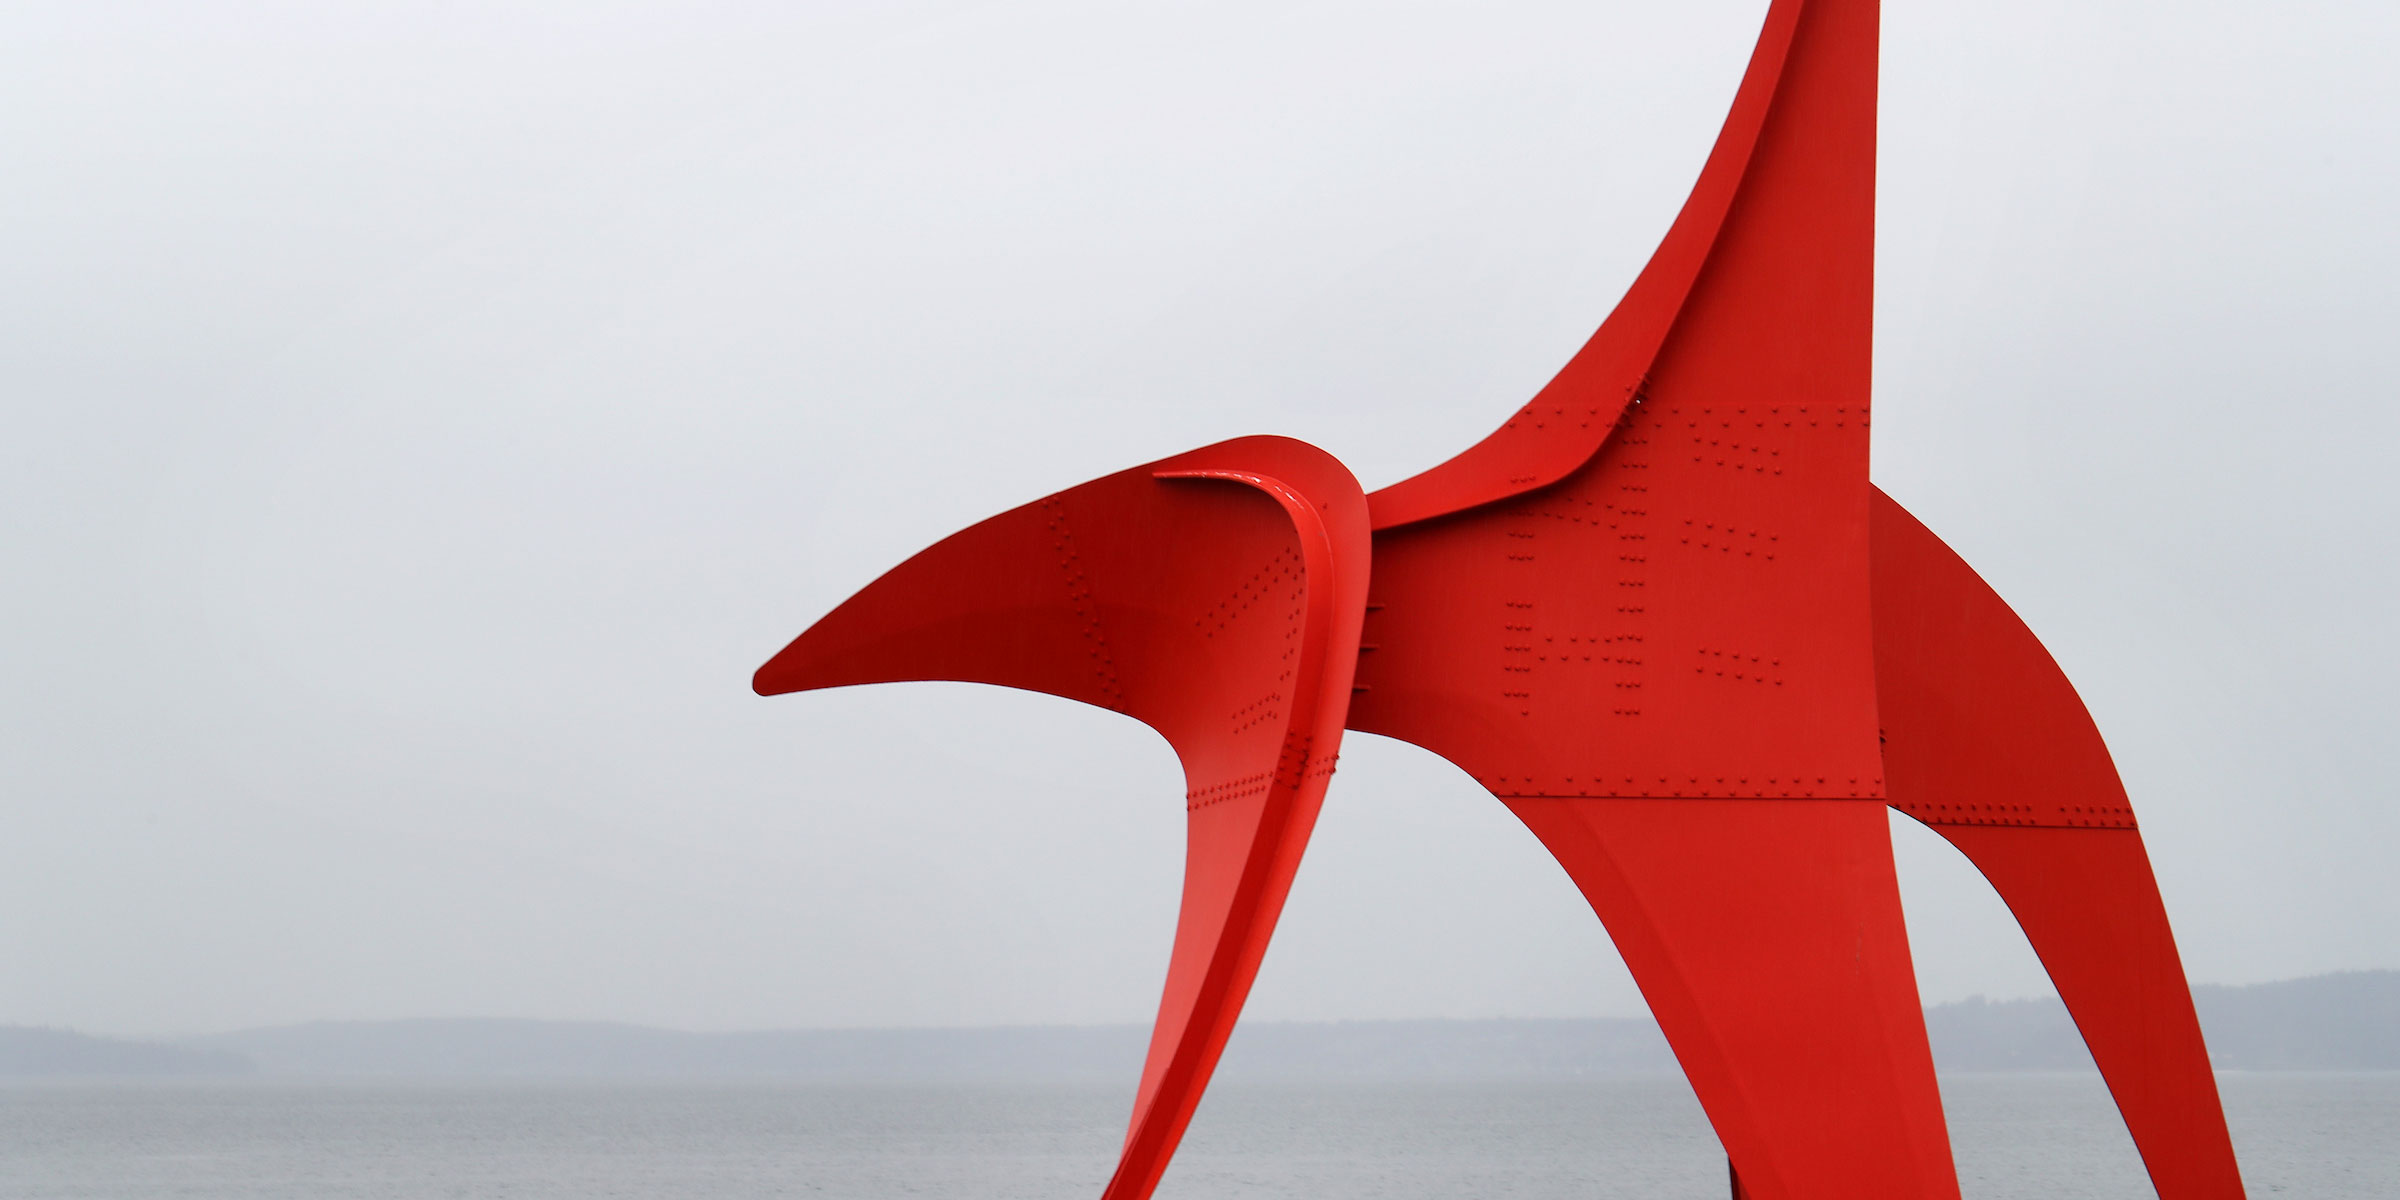 a red painted steel sculpture by Calder - a Seattle icon on the waterfront on a grey day